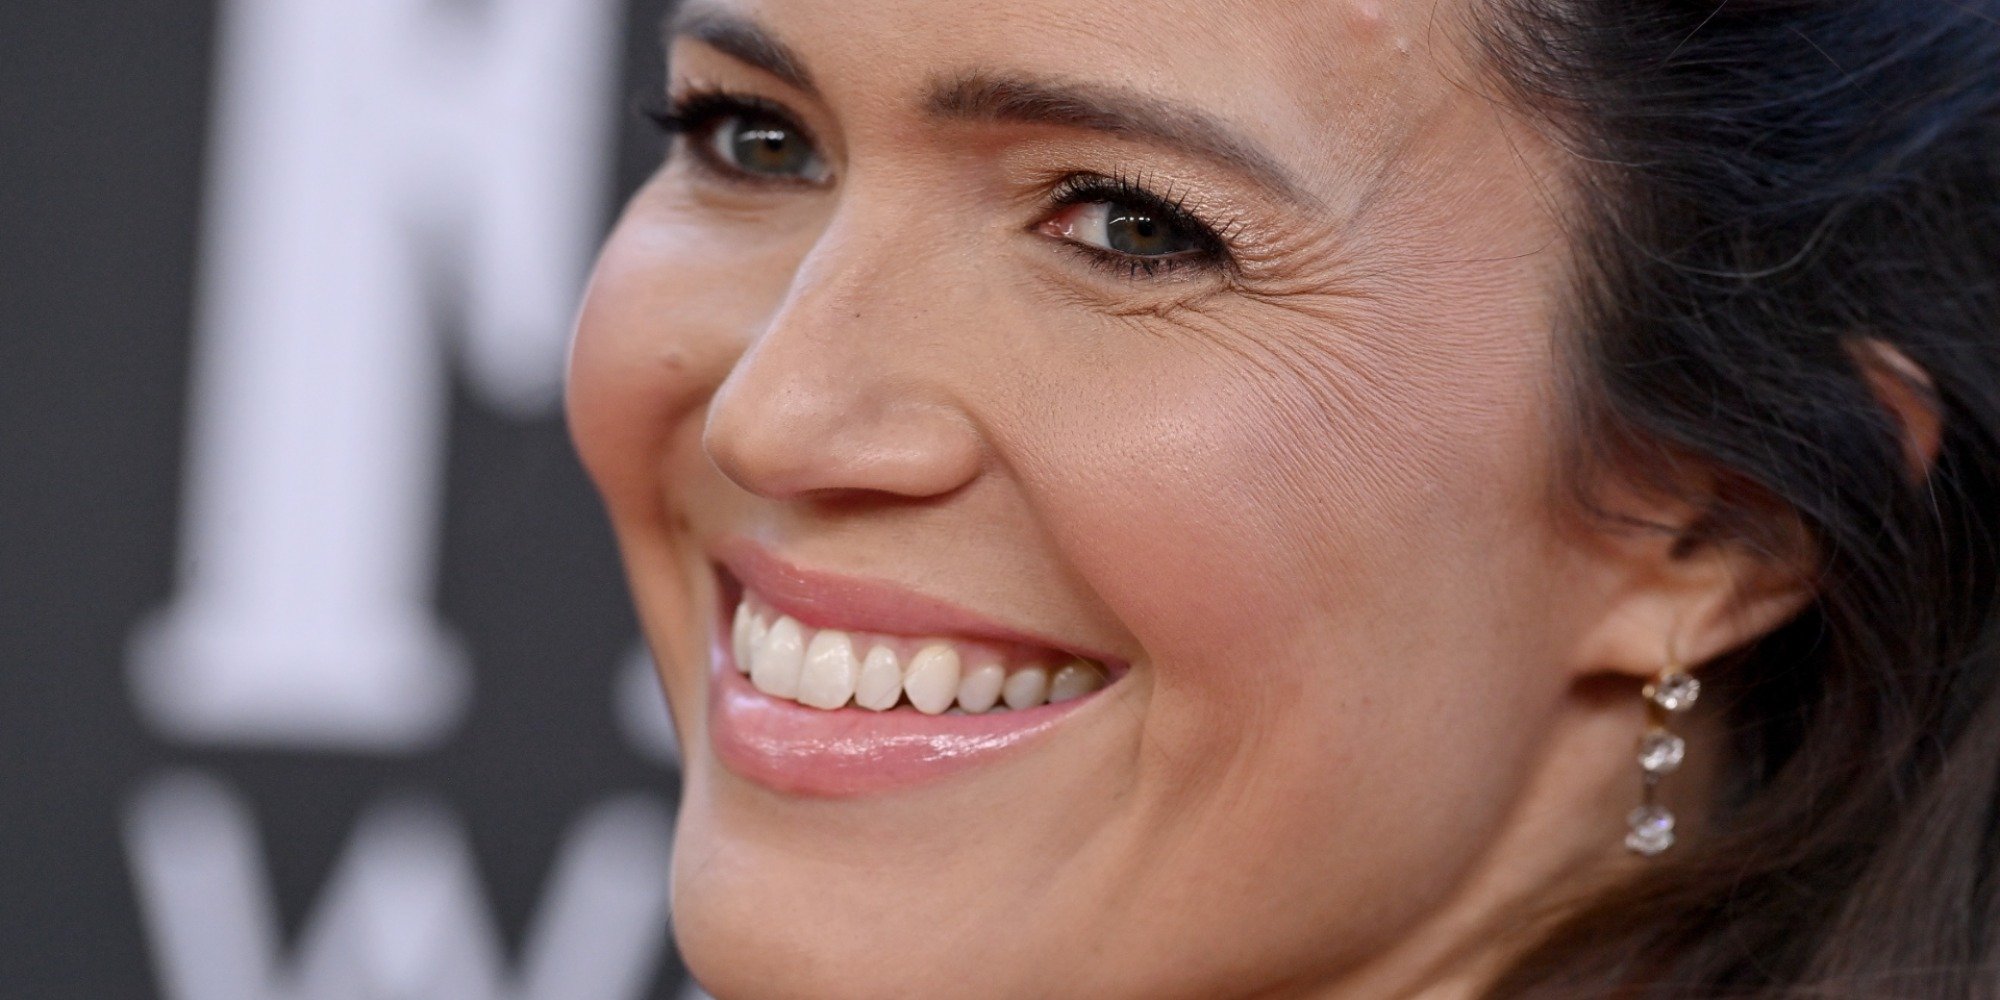 'This Is Us' star Mandy Moore poses on the red carpet in a cream colored gown.